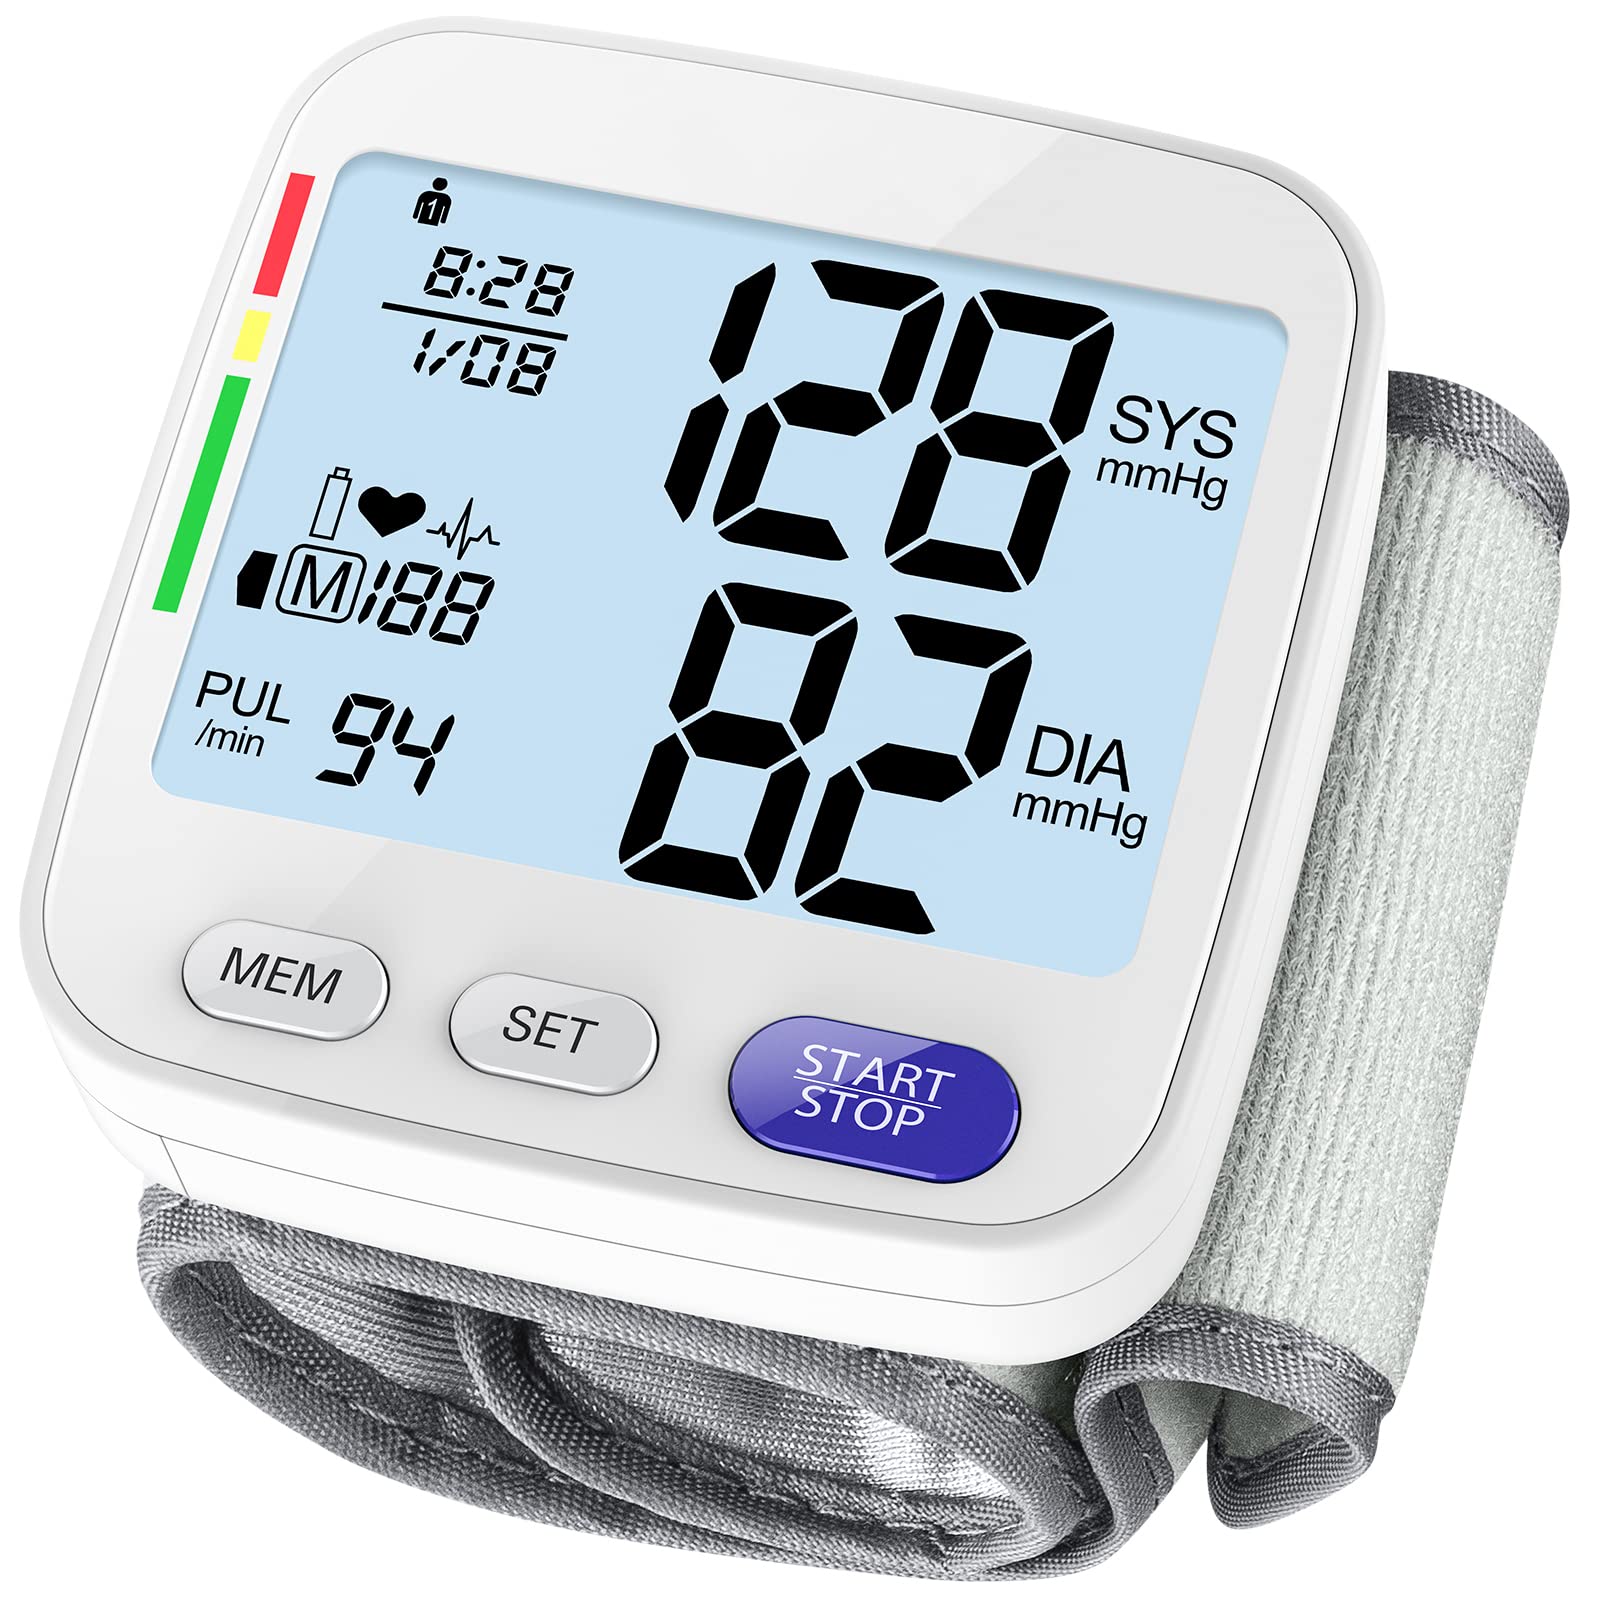 MOBI - Blood Pressure Cuff - Wrist Blood Pressure Monitor - Automatic BP  Cuff with Large LCD Display - Pulse Rate, Irregular Heart Rate Monitor